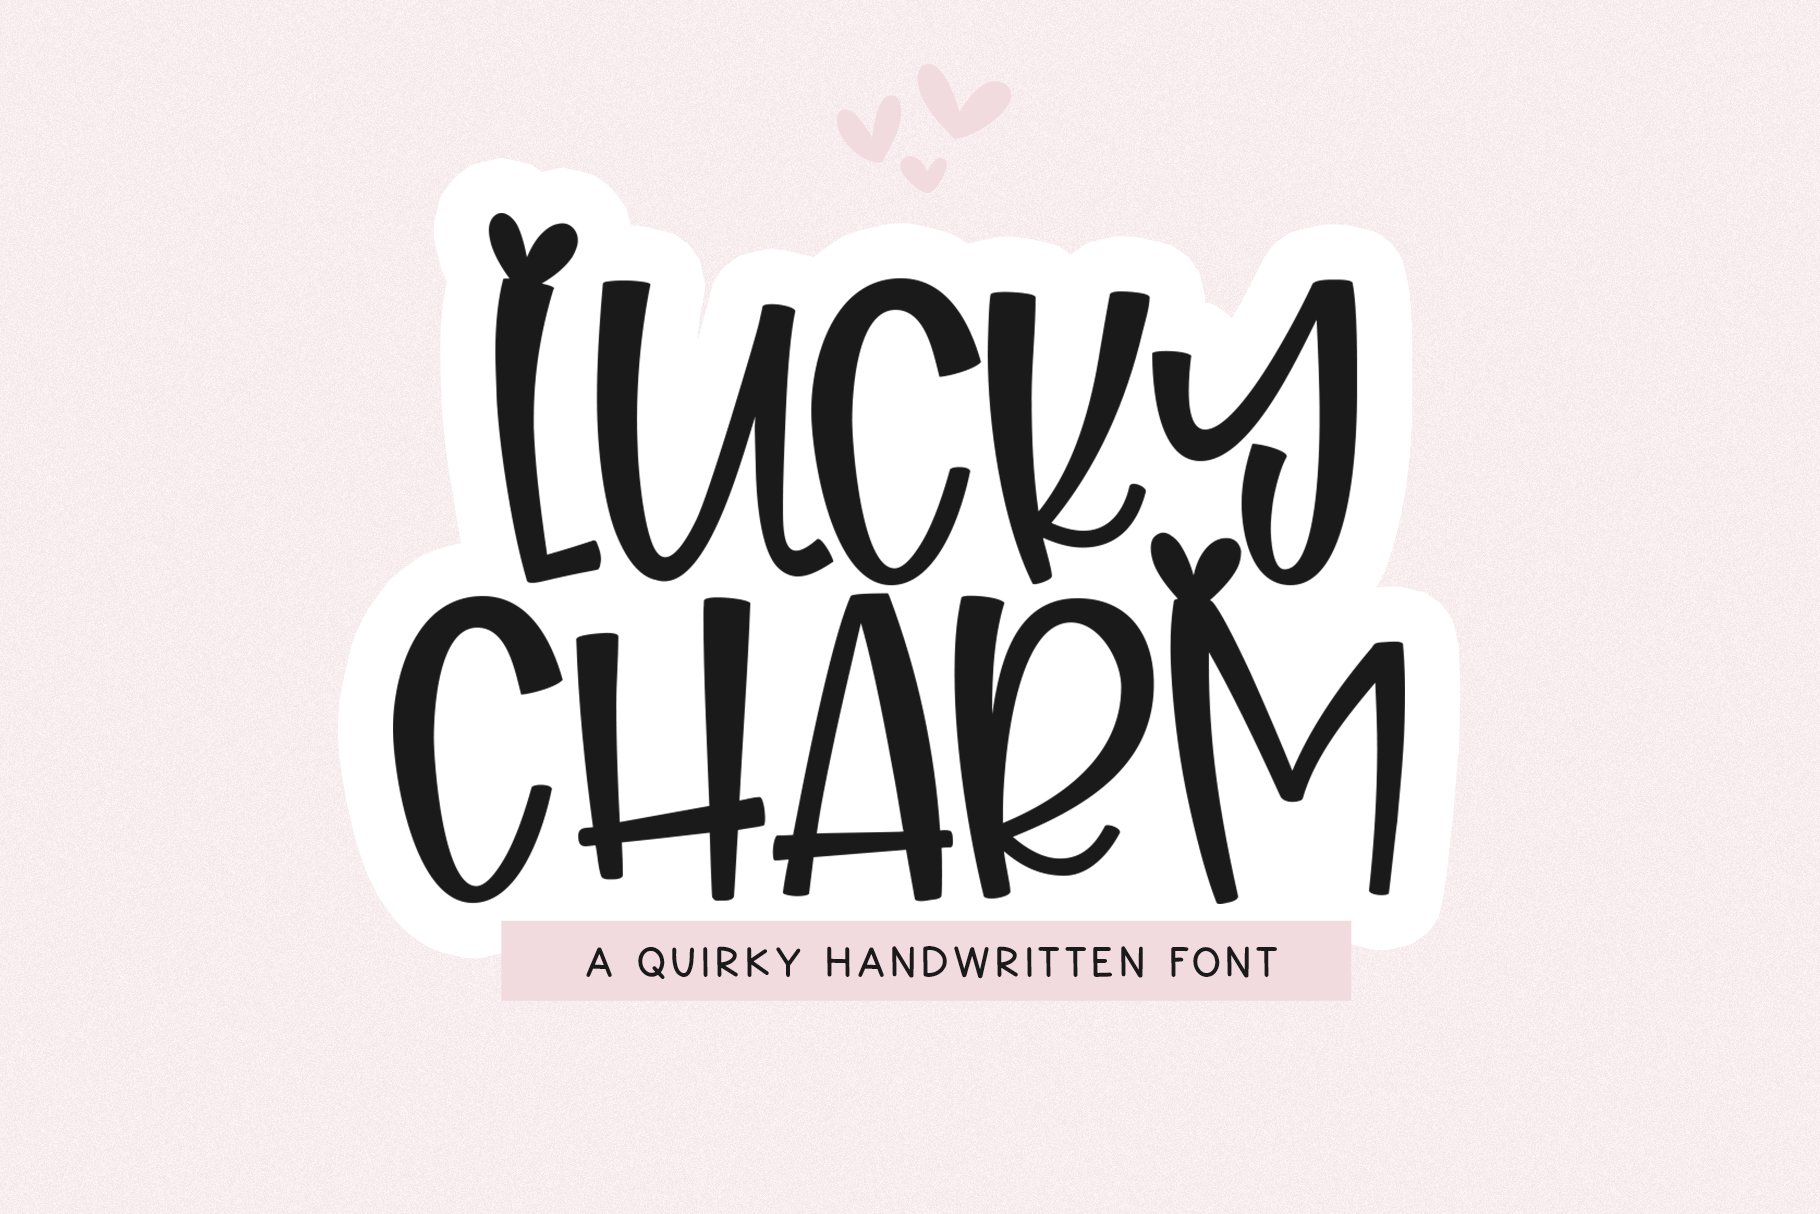 Lucky Charm - A Handwritten Font cover image.